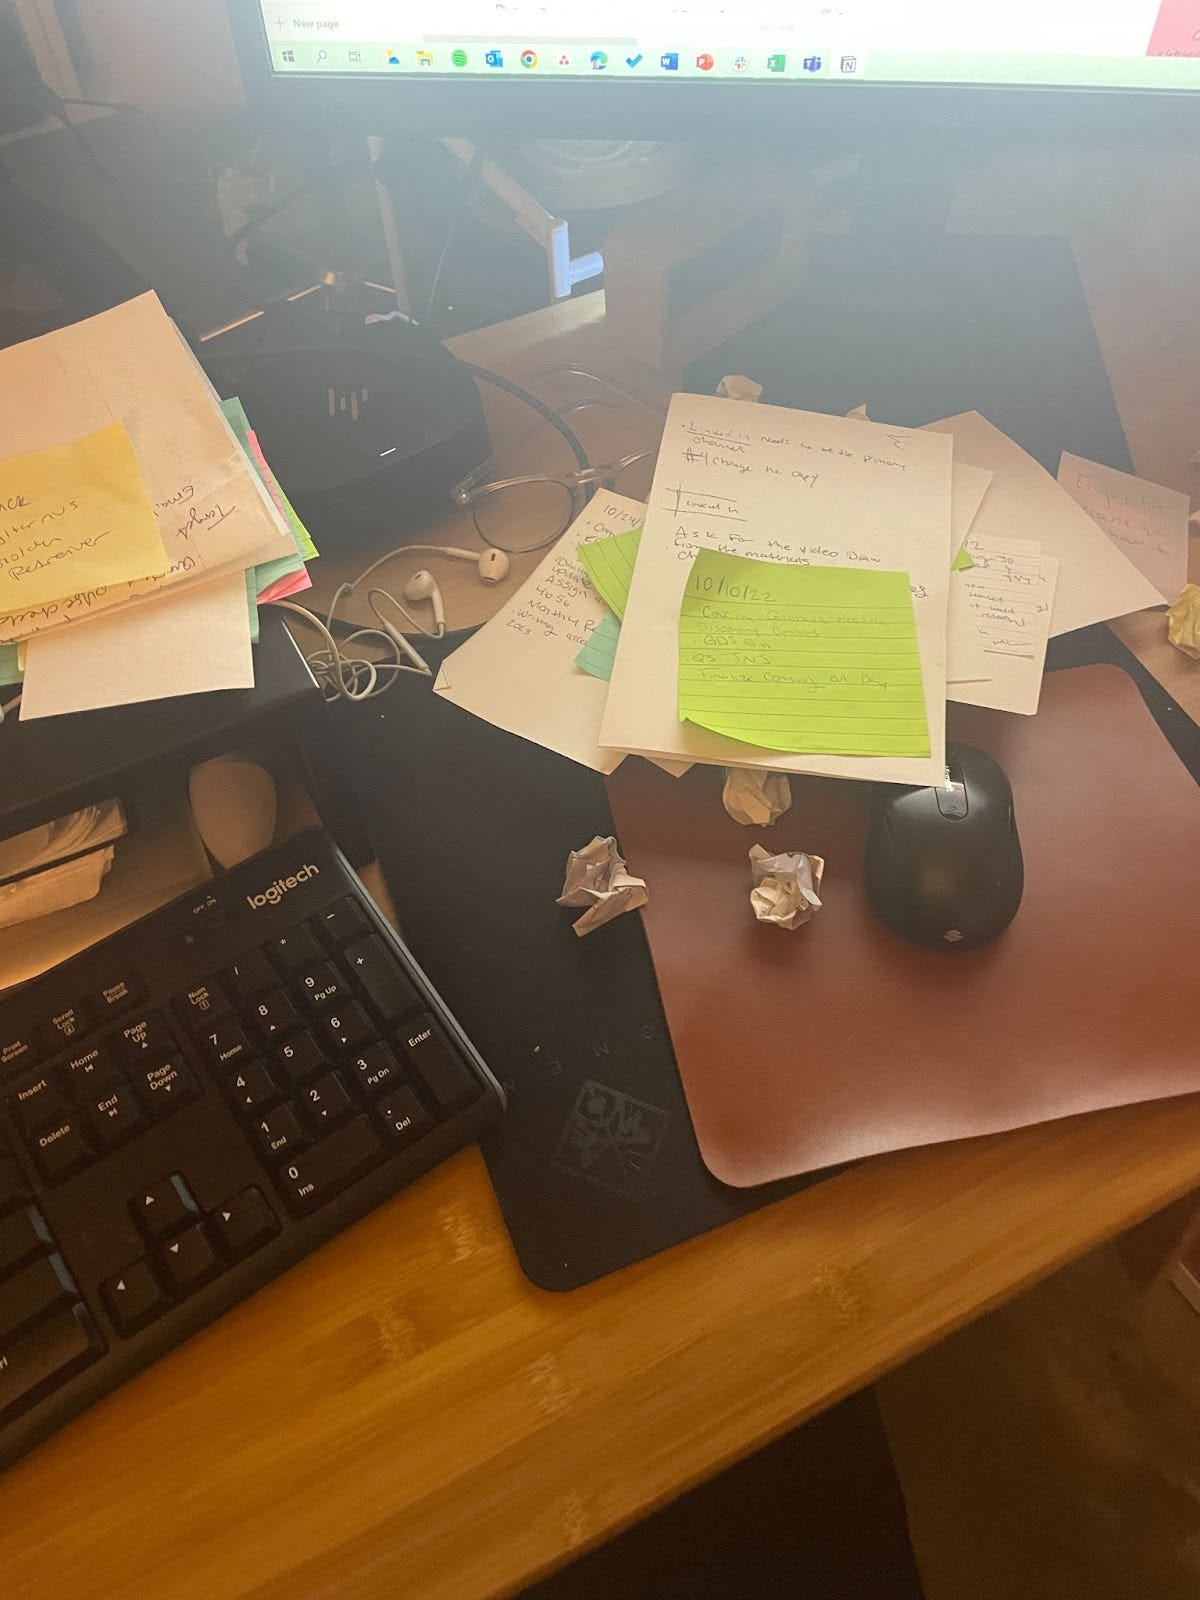 A messy desk, covered in loose papers and sticky notes